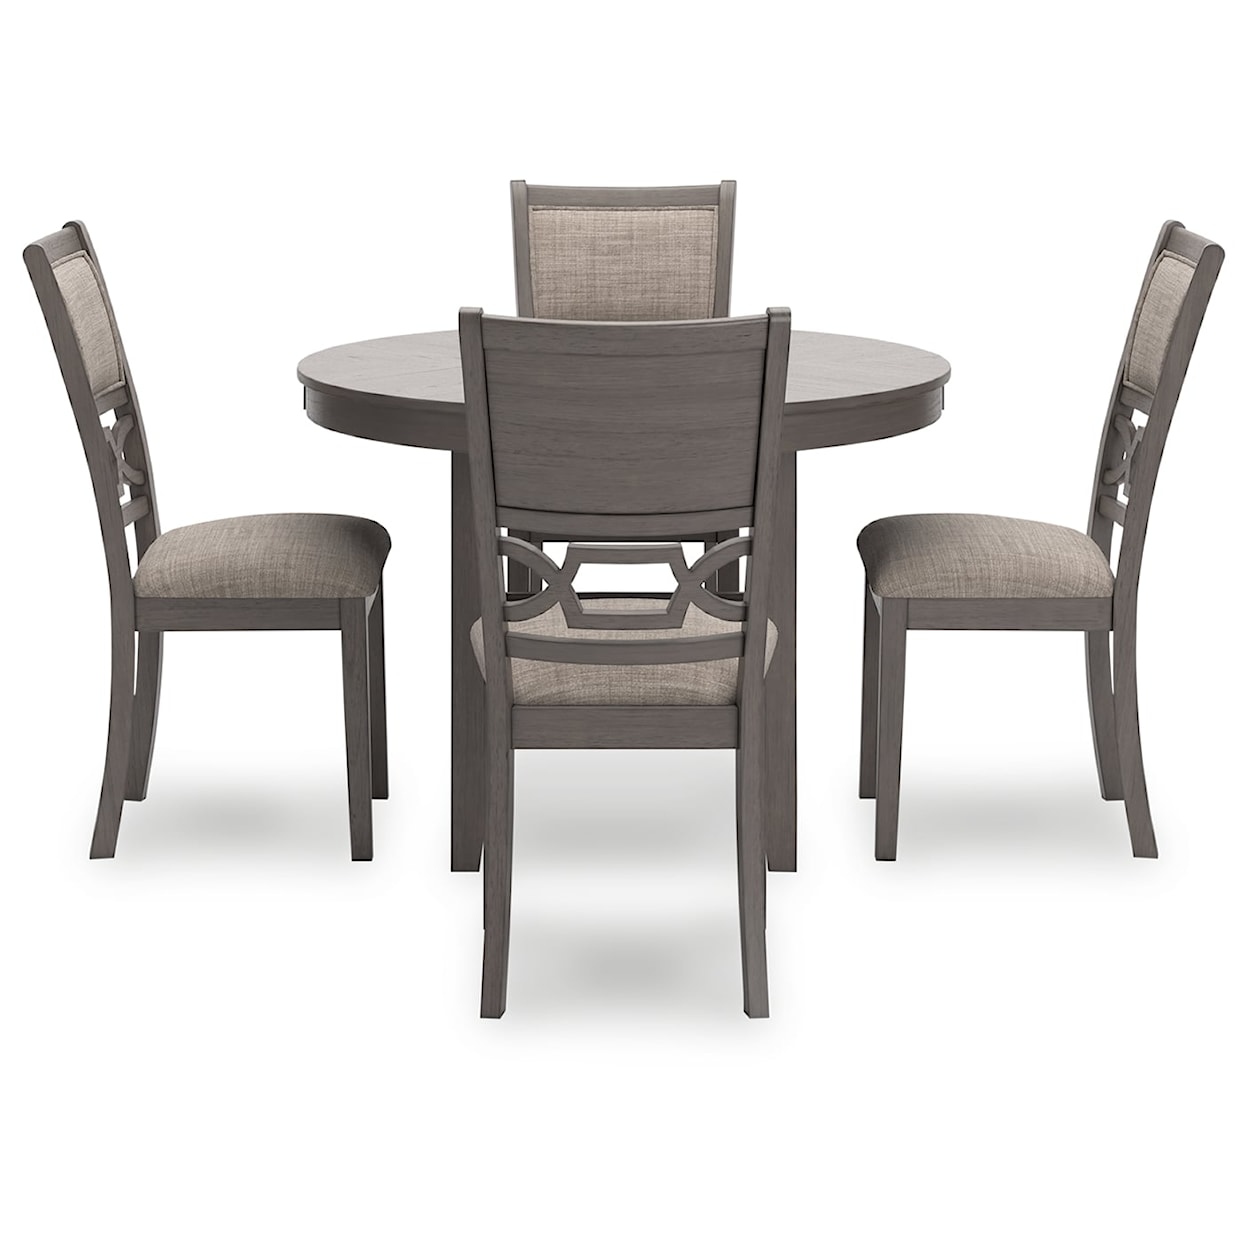 Signature Design by Ashley Furniture Wrenning Dining Room Table Set